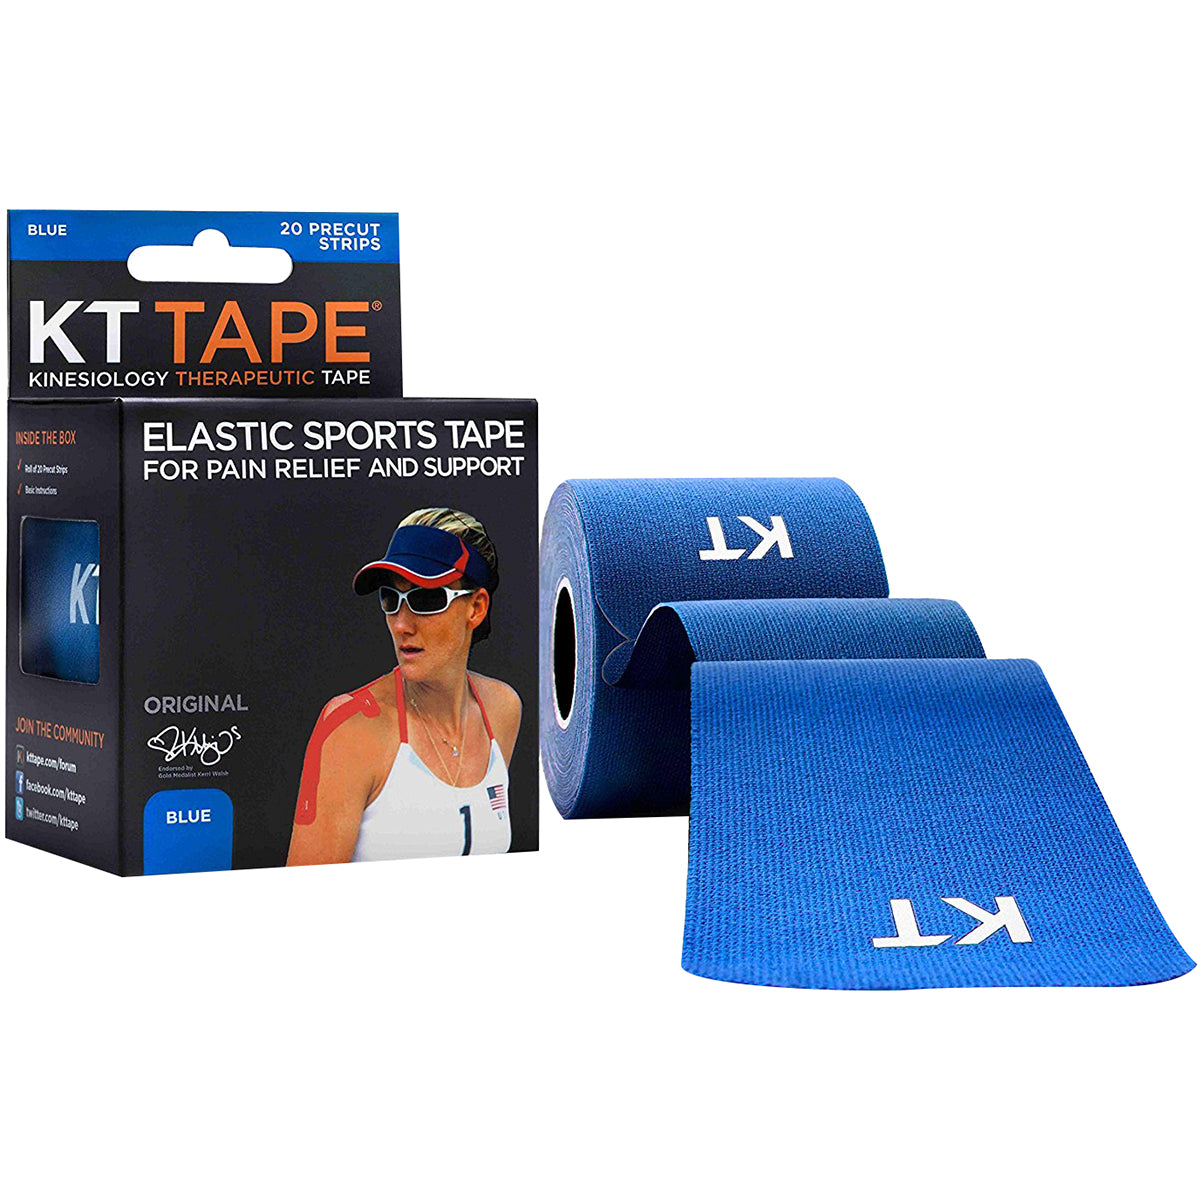 KT Tape Cotton 10" Precut Kinesiology Therapeutic Elastic Sports Roll, 20 Strips KT Tape